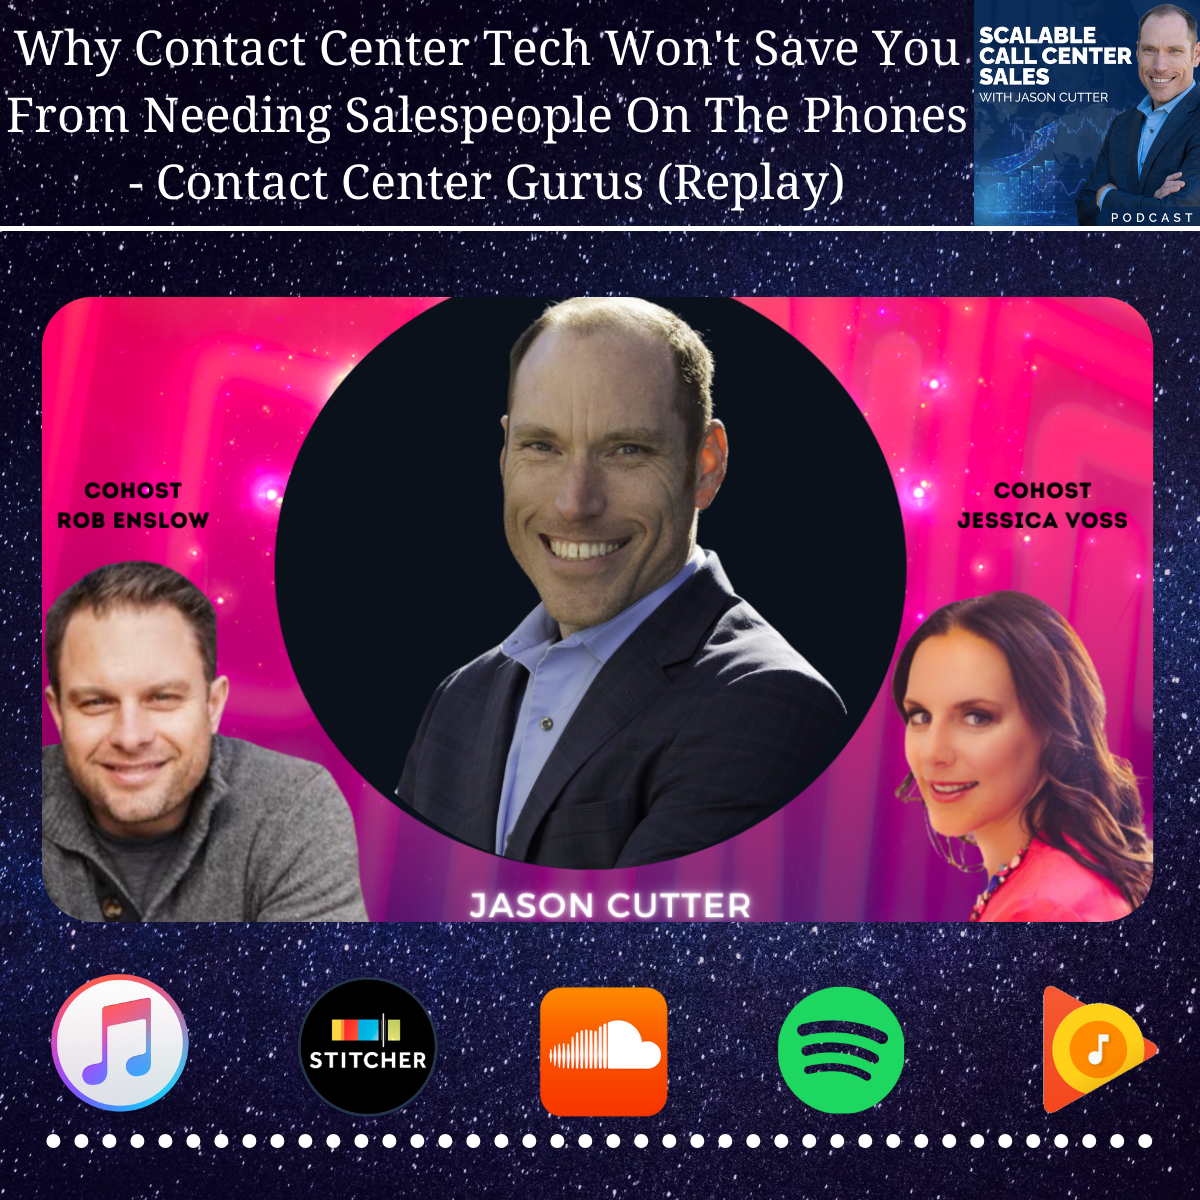 [032] Why Contact Center Tech Won't Save You From Needing Salespeople On The Phones - Contact Center Gurus (Replay)